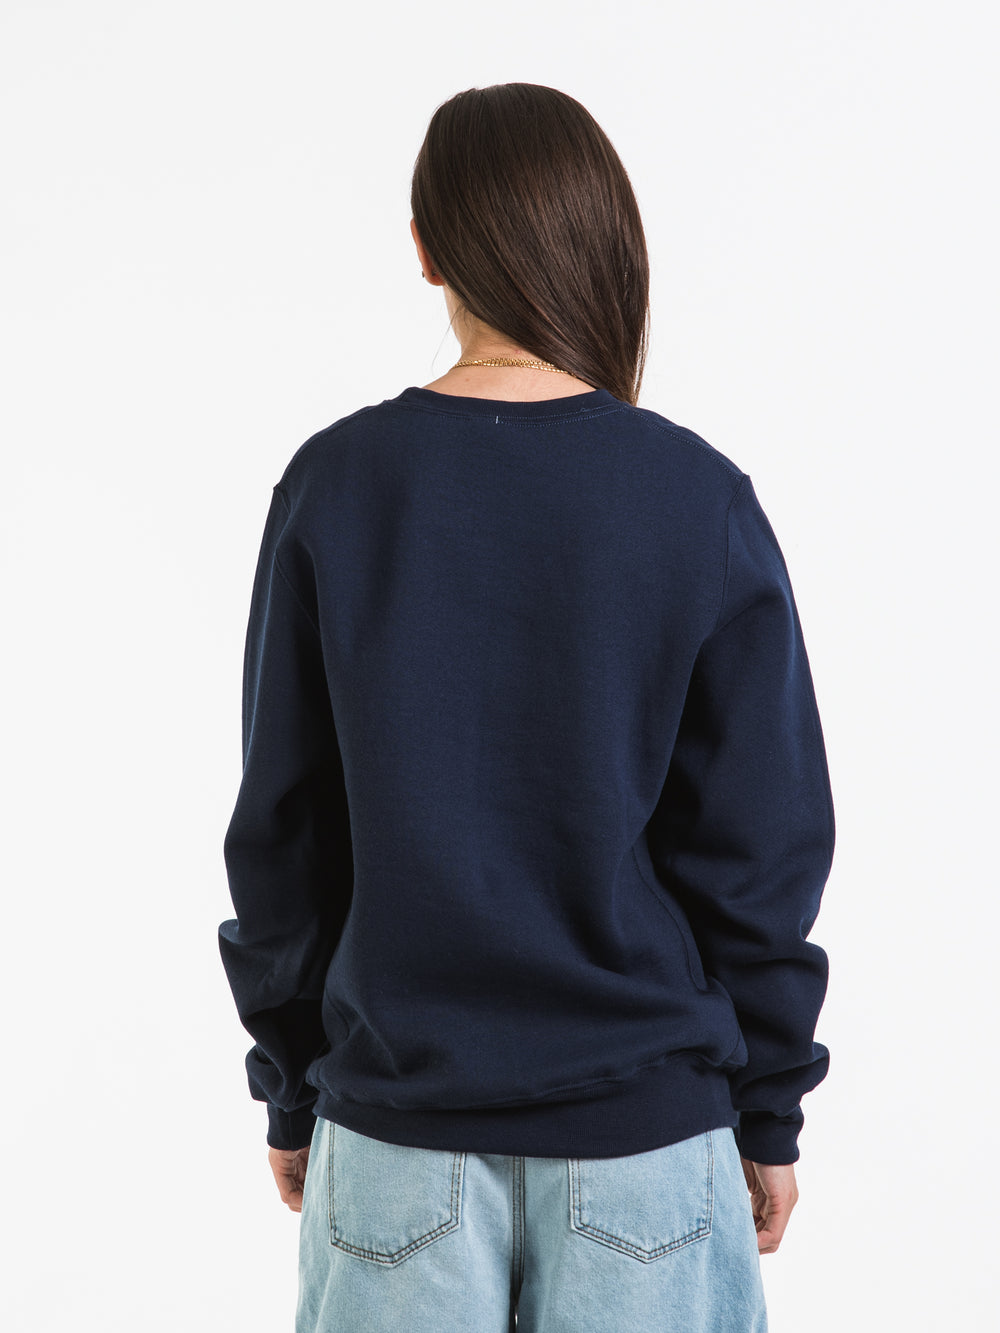 RUSSELL PENN STATEATE CREWNECK  - CLEARANCE